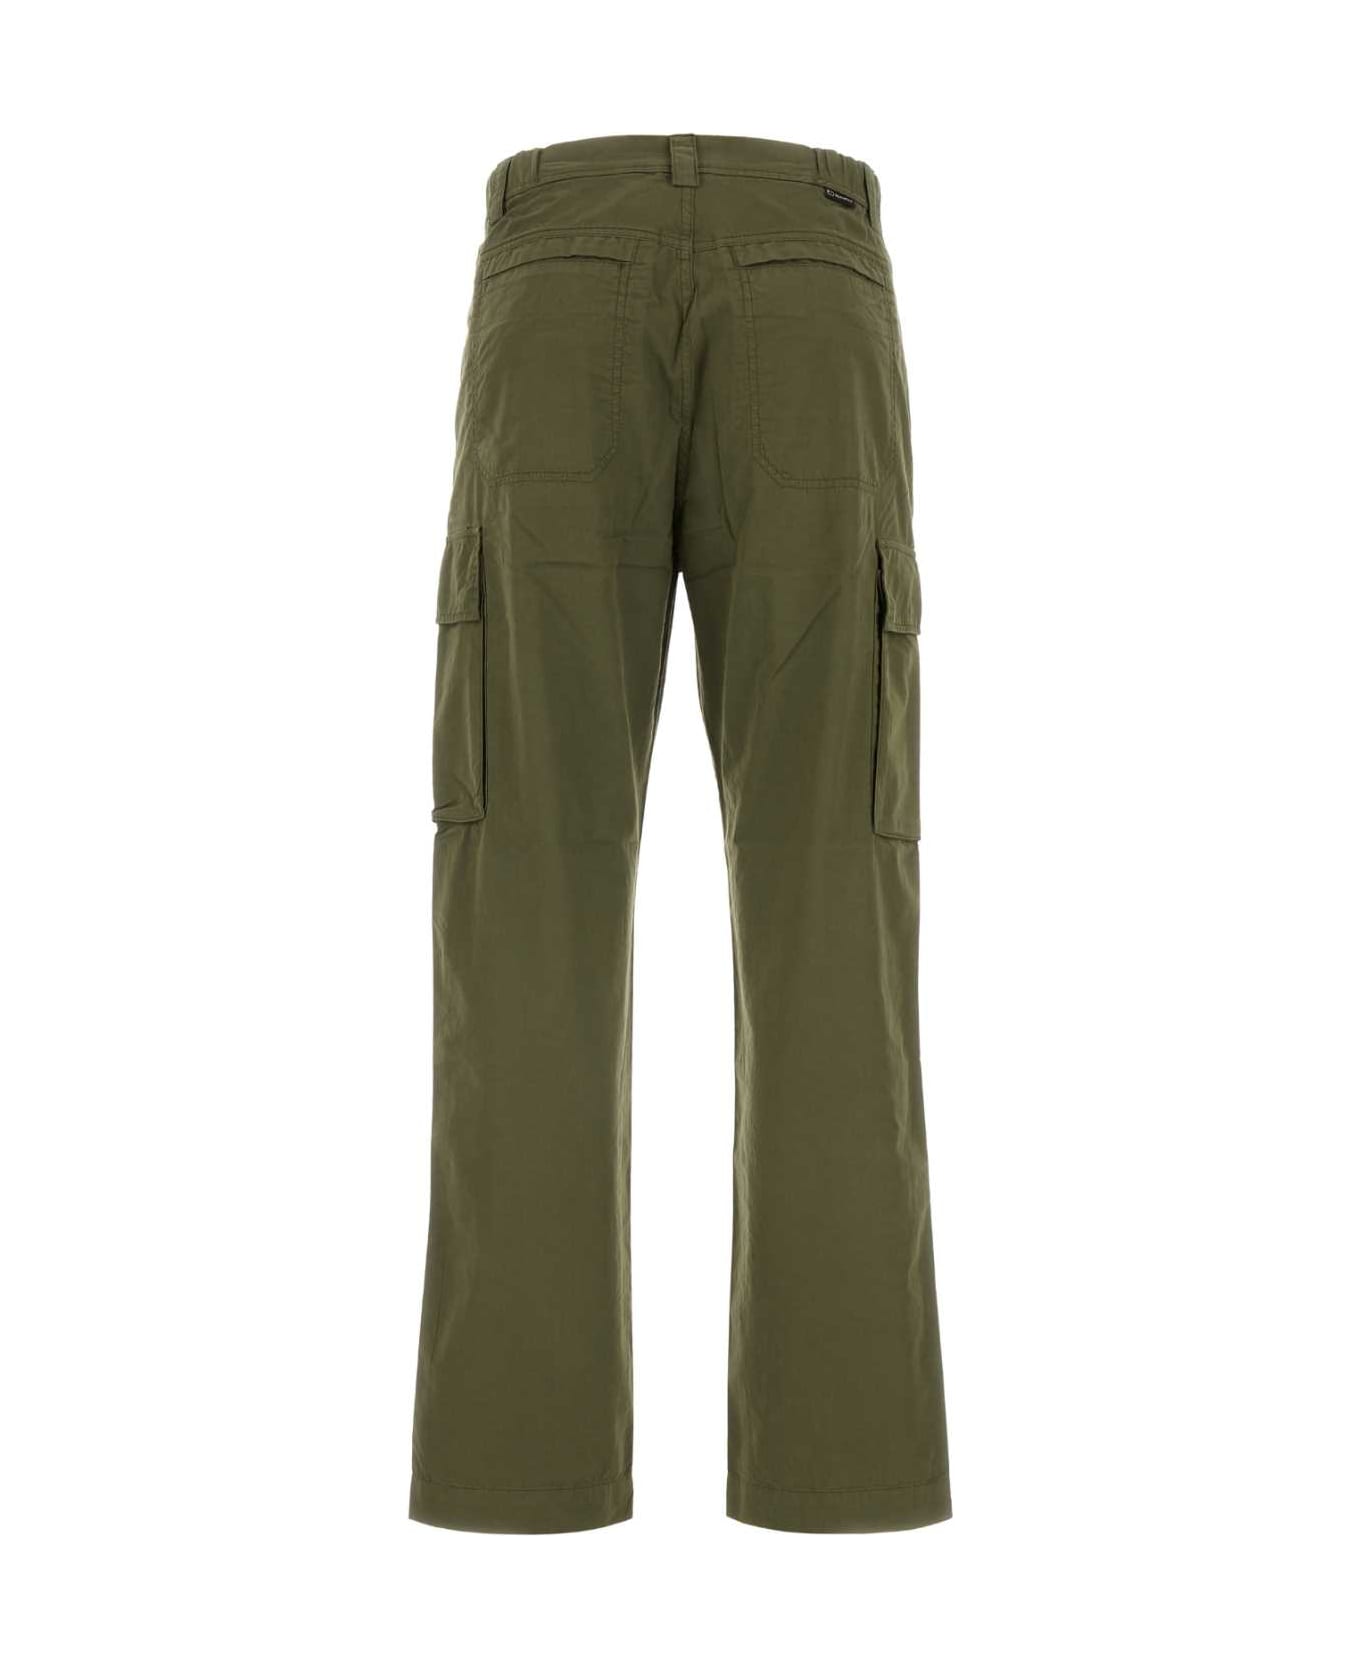 Woolrich Army Green Cotton Pant - 6178